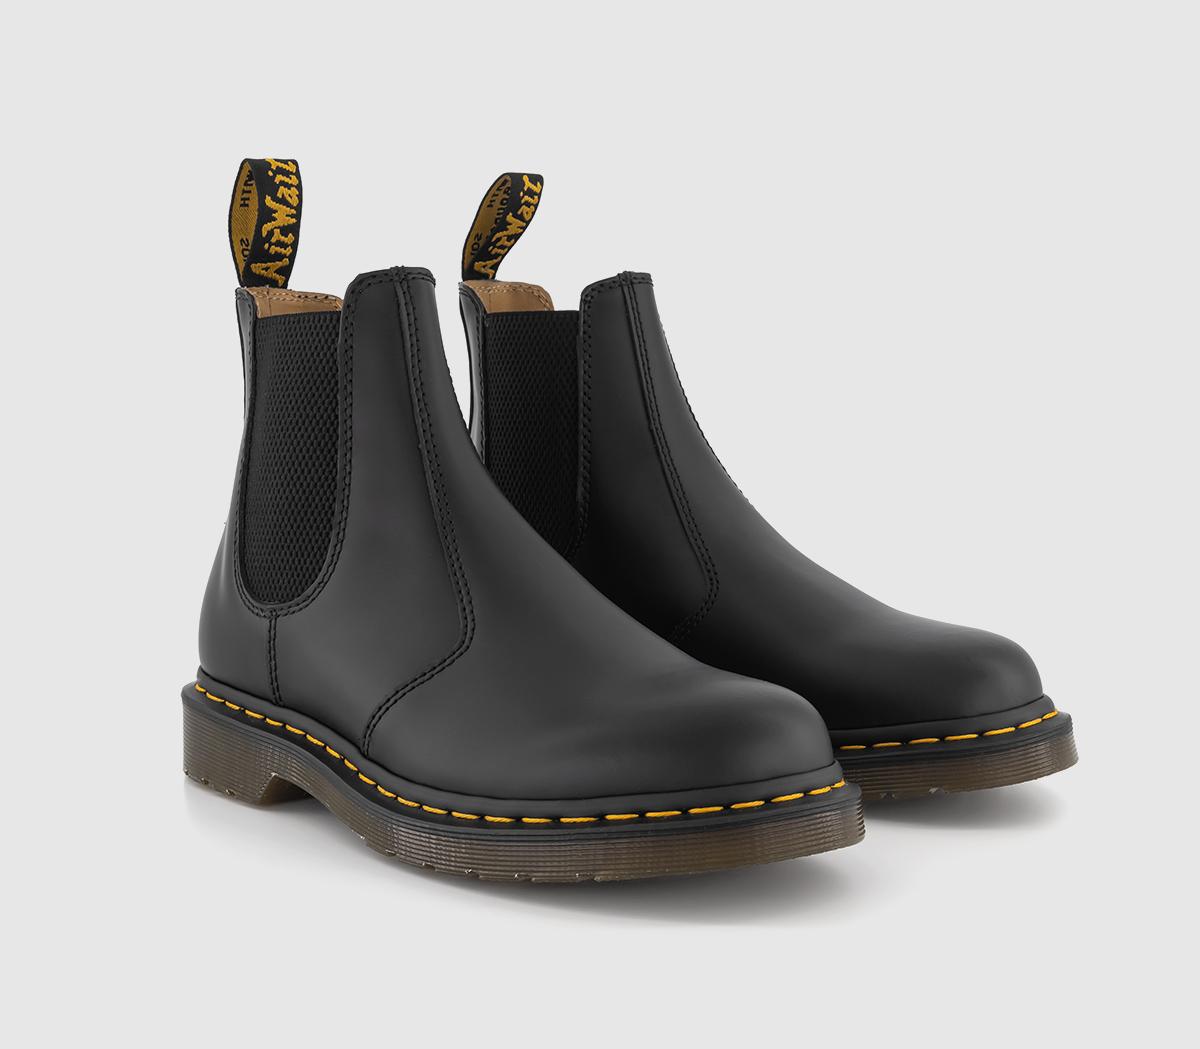 Dr. Martens 2976 Chelsea Boots Black Leather - Women's Ankle Boots